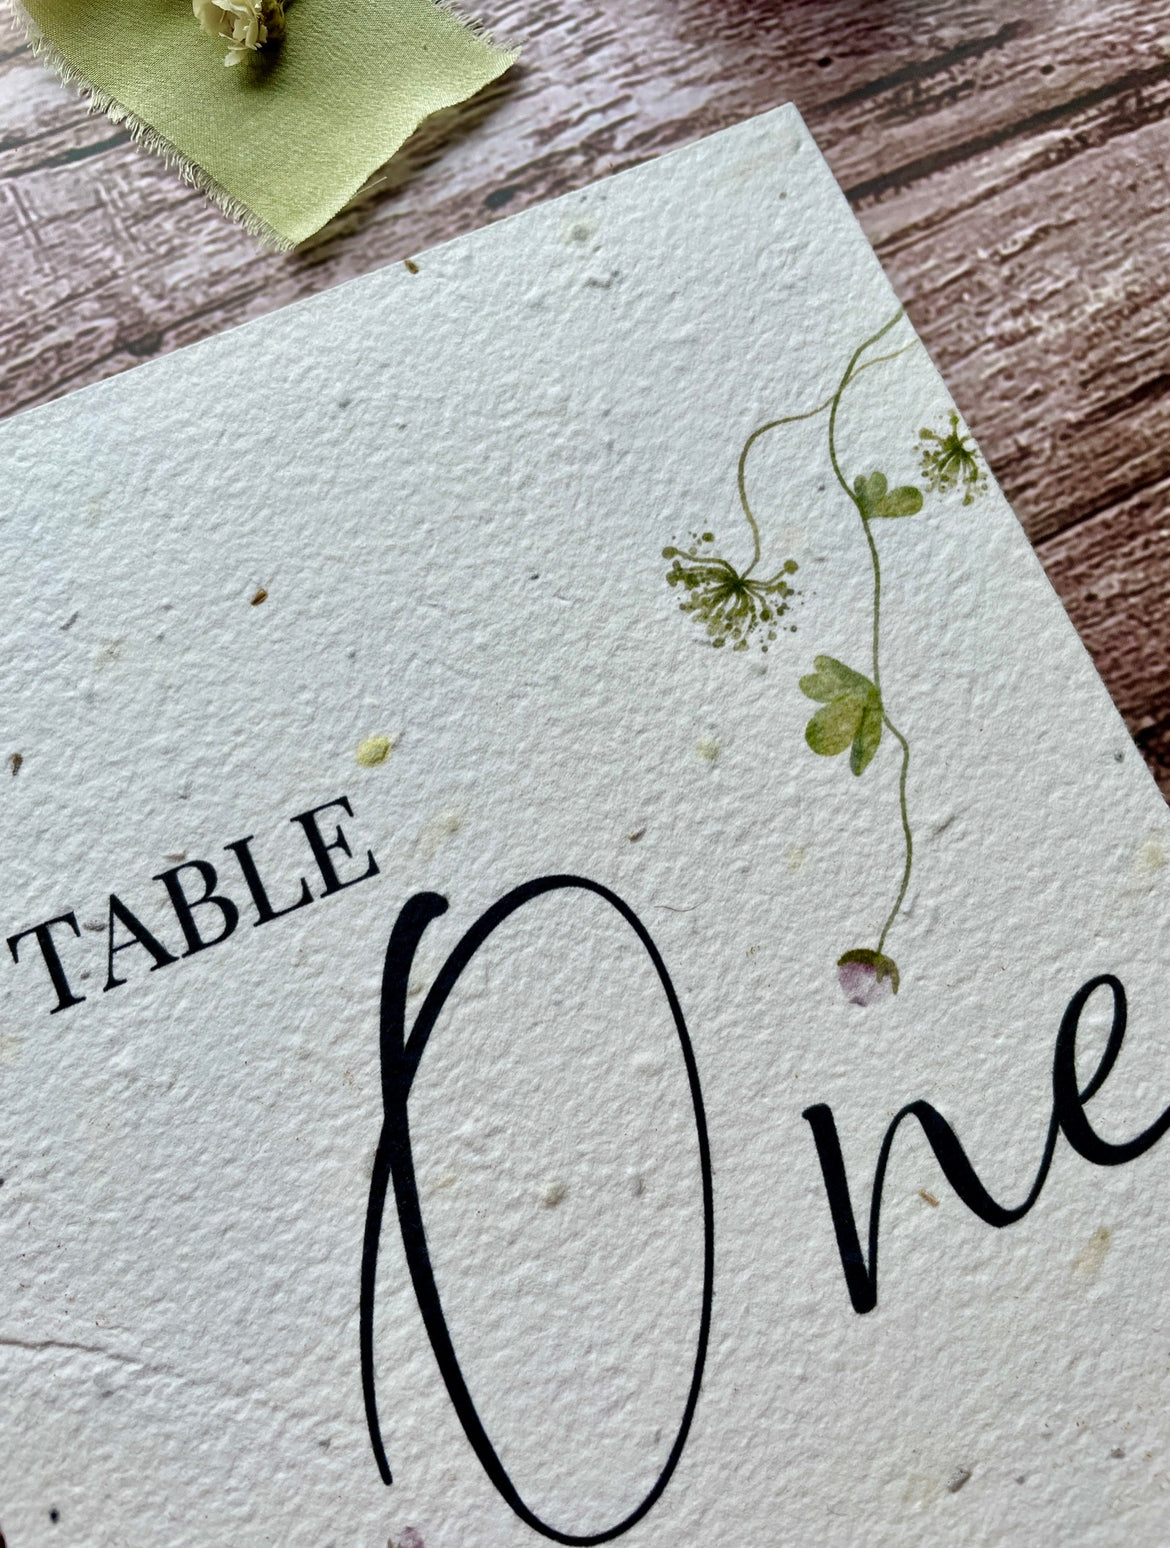 Plantable Wedding Table Number or Name Cards - Spring Green